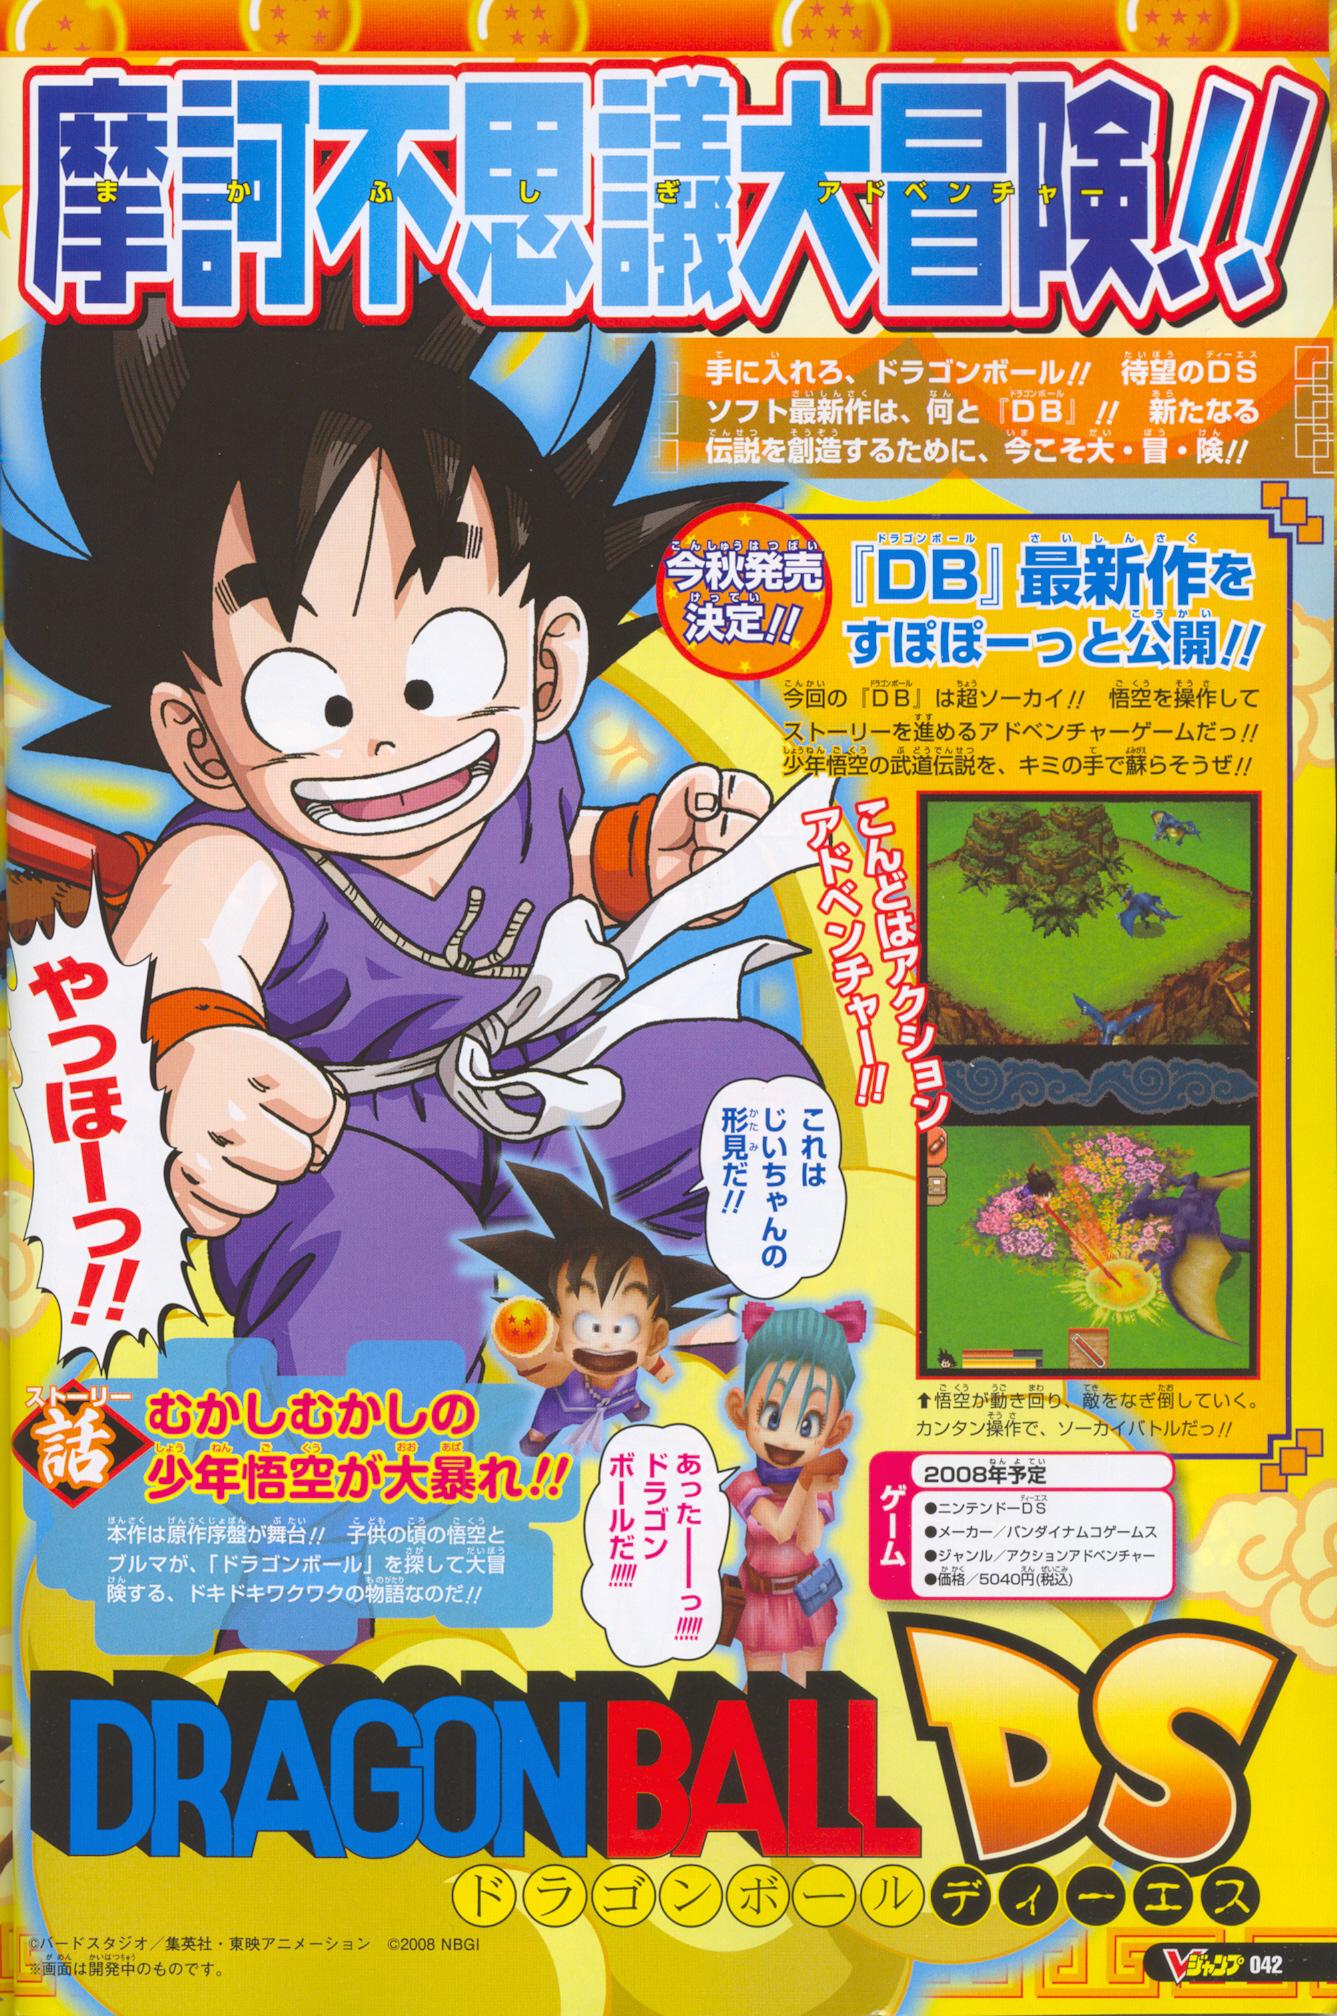 Download+dragon+ball+z+games+for+ds